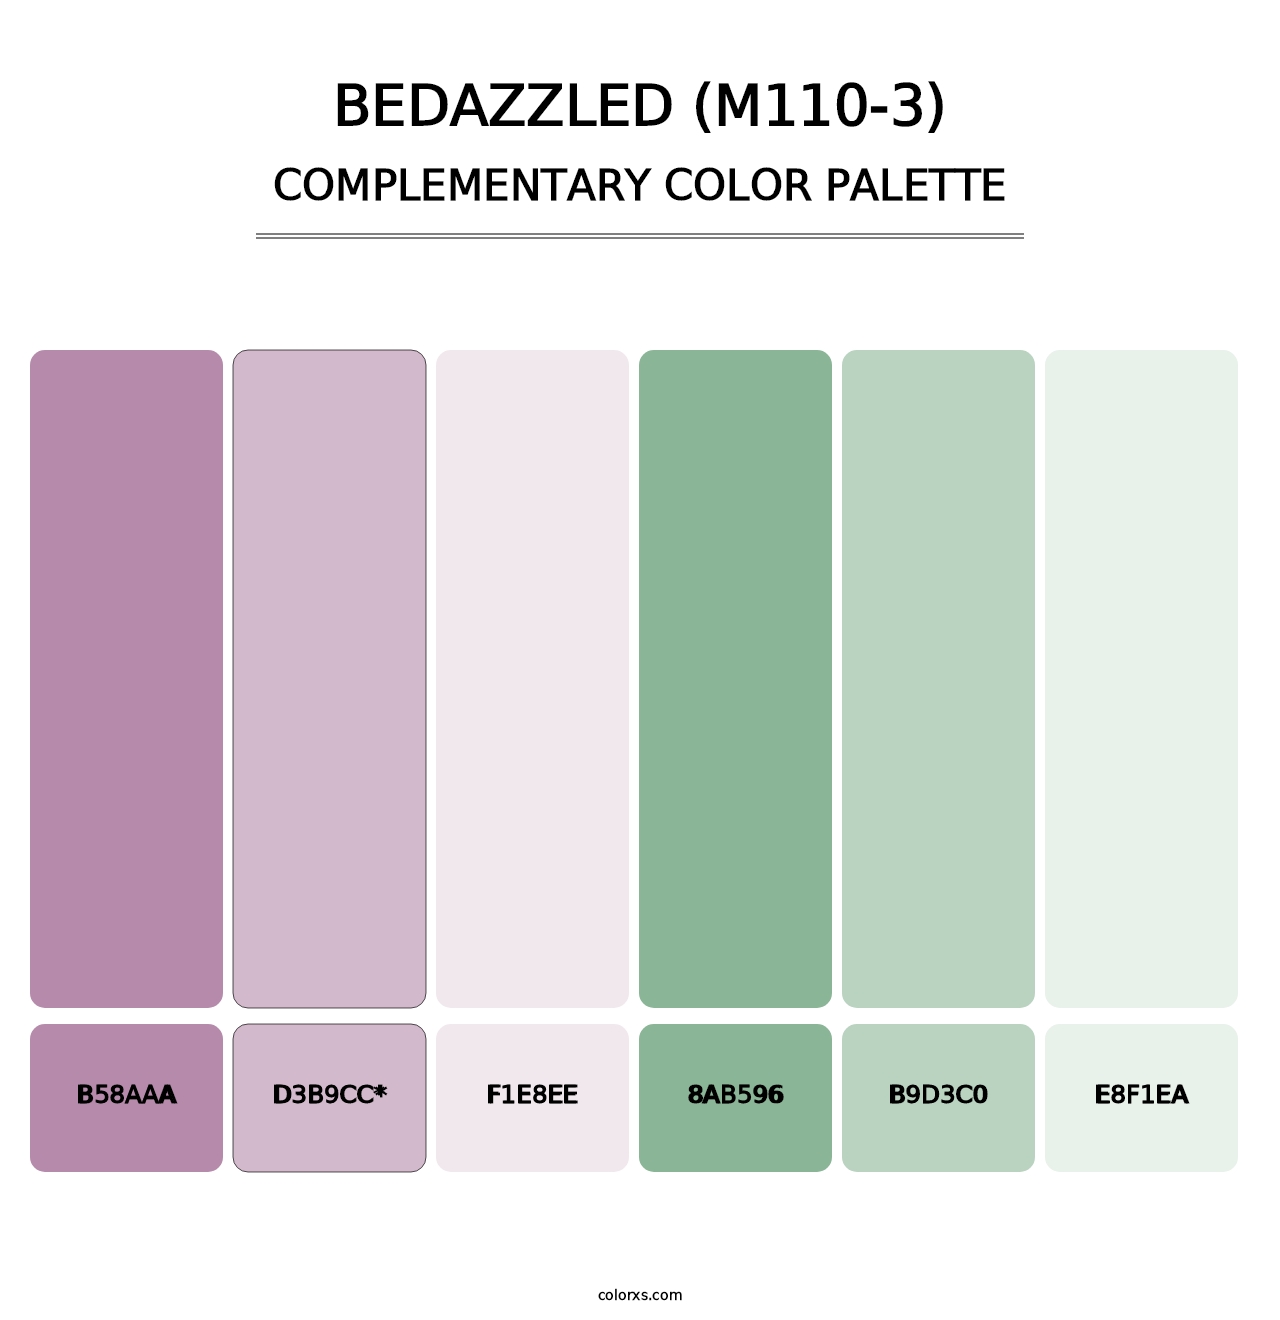 Bedazzled (M110-3) - Complementary Color Palette